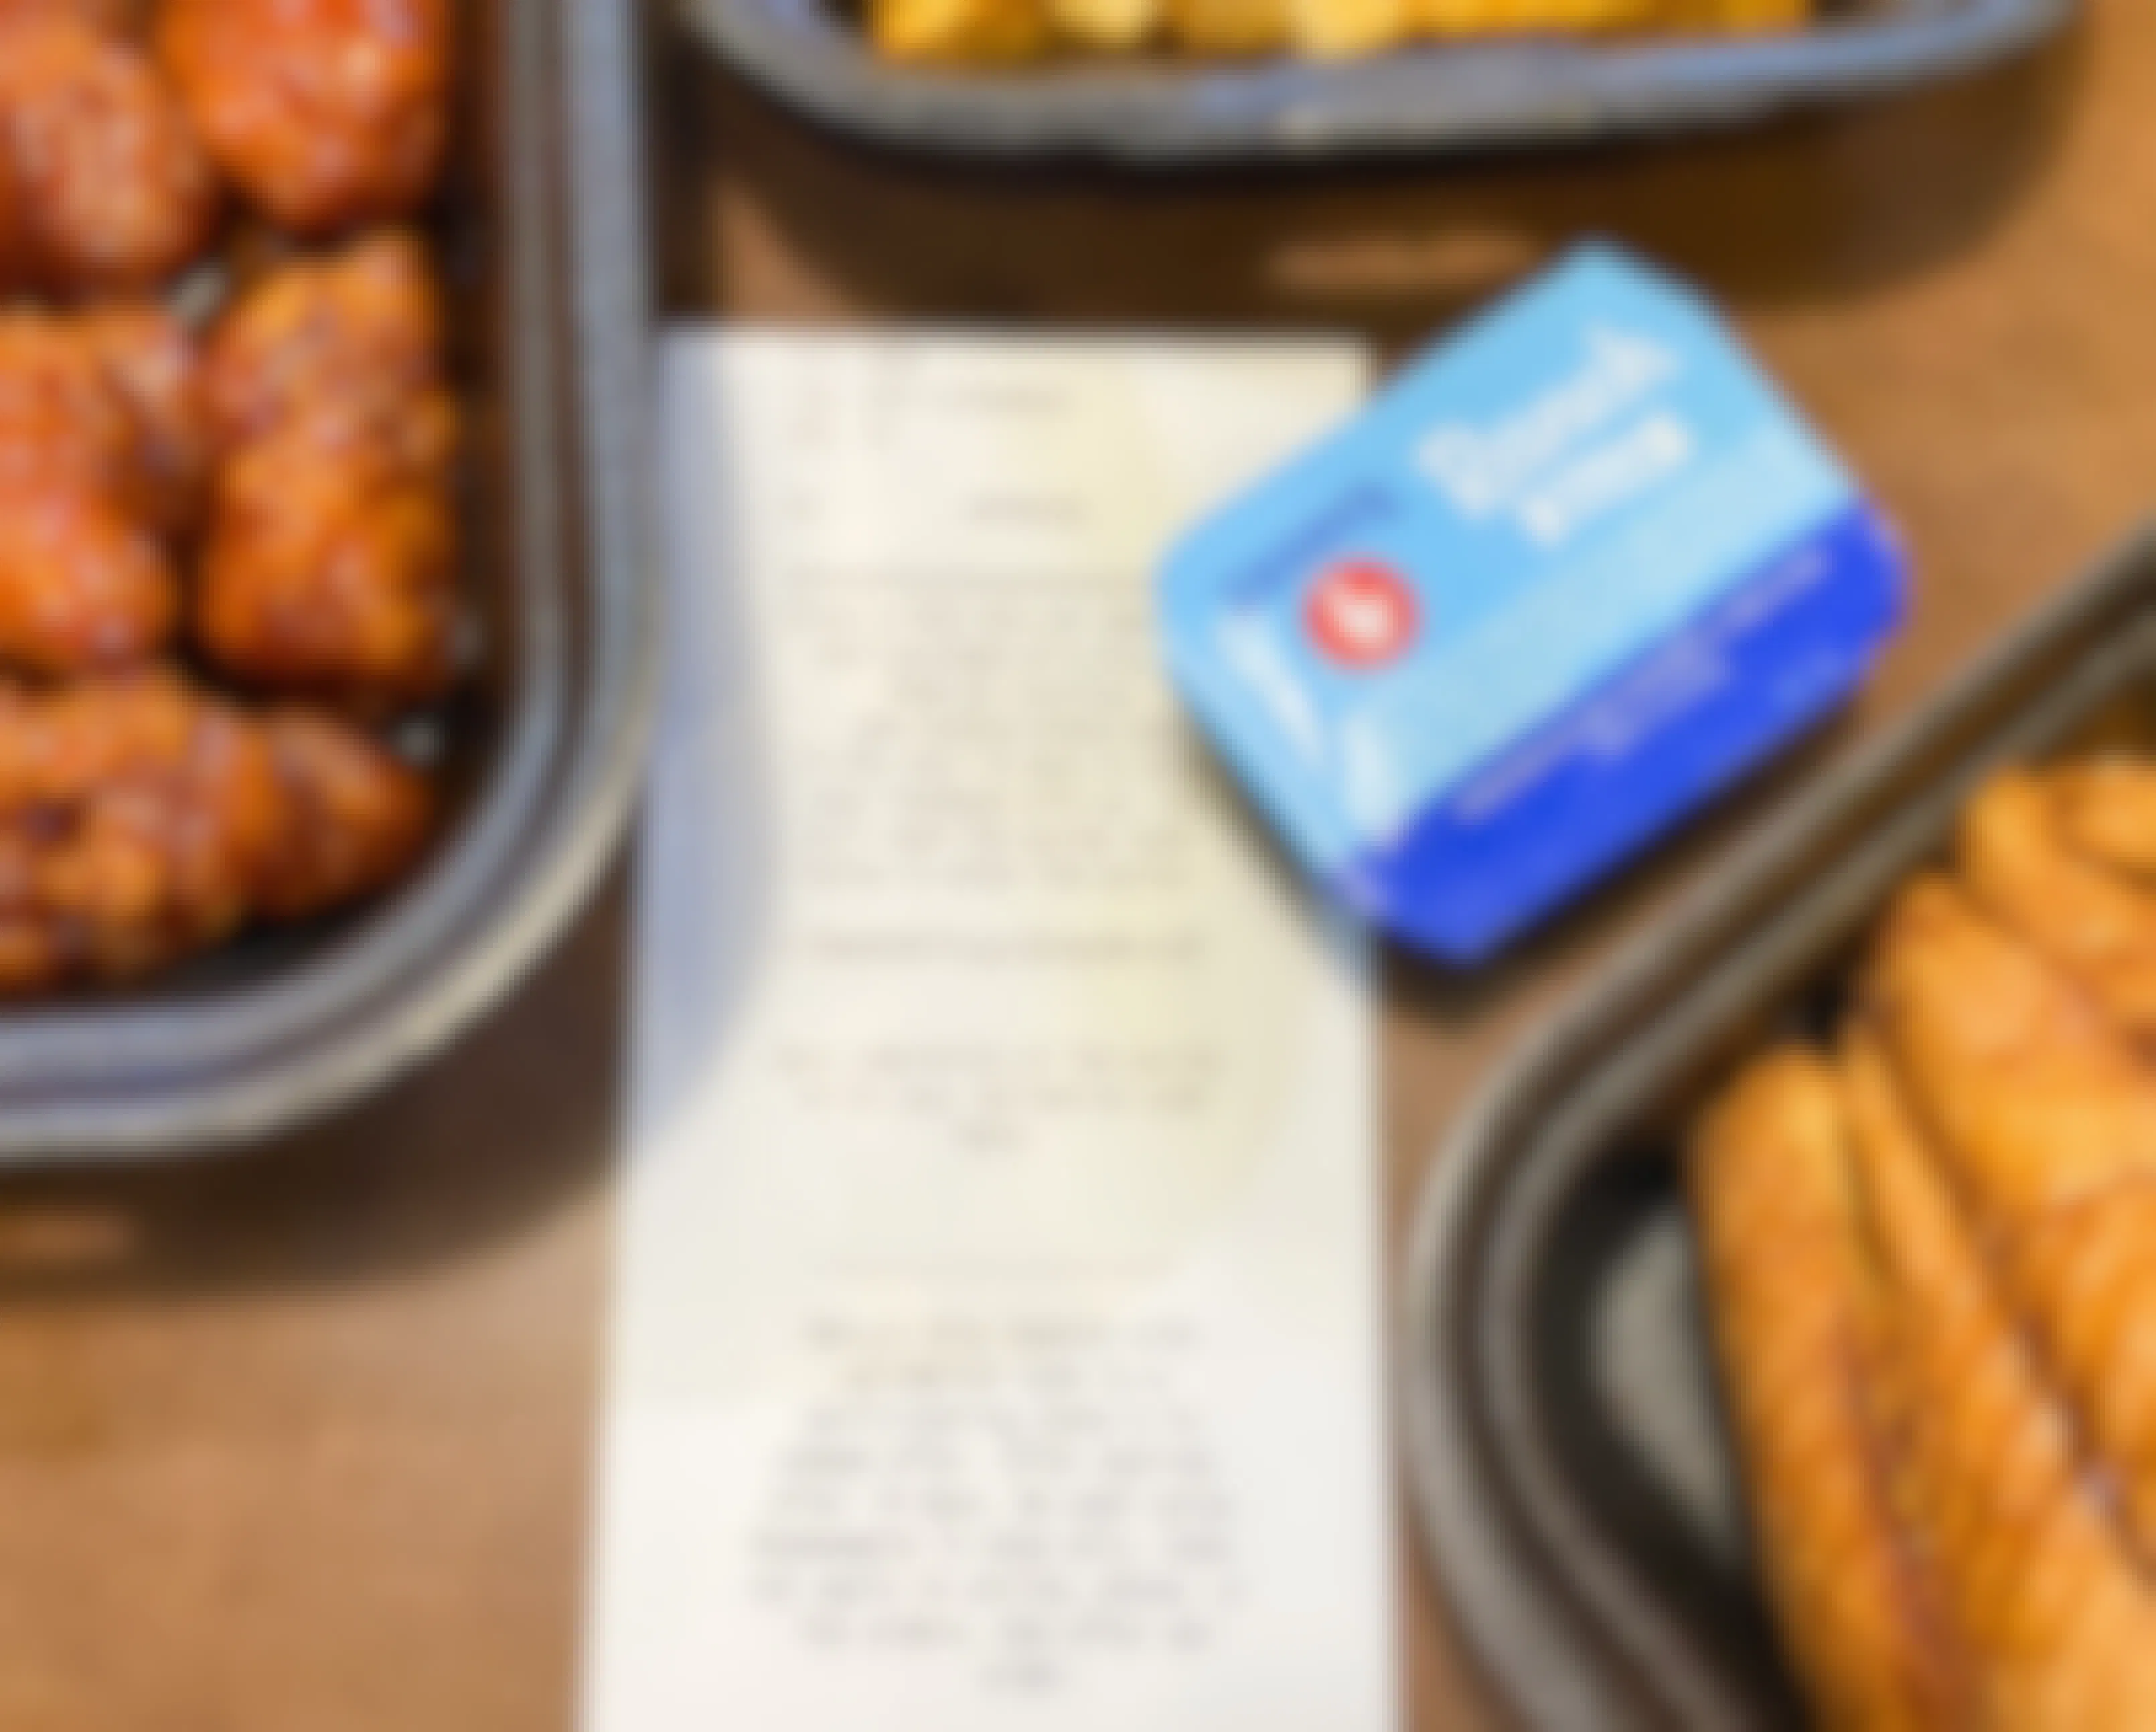 A Zaxby's receipt laying on a table next to boxes of chicken and a ranch container.